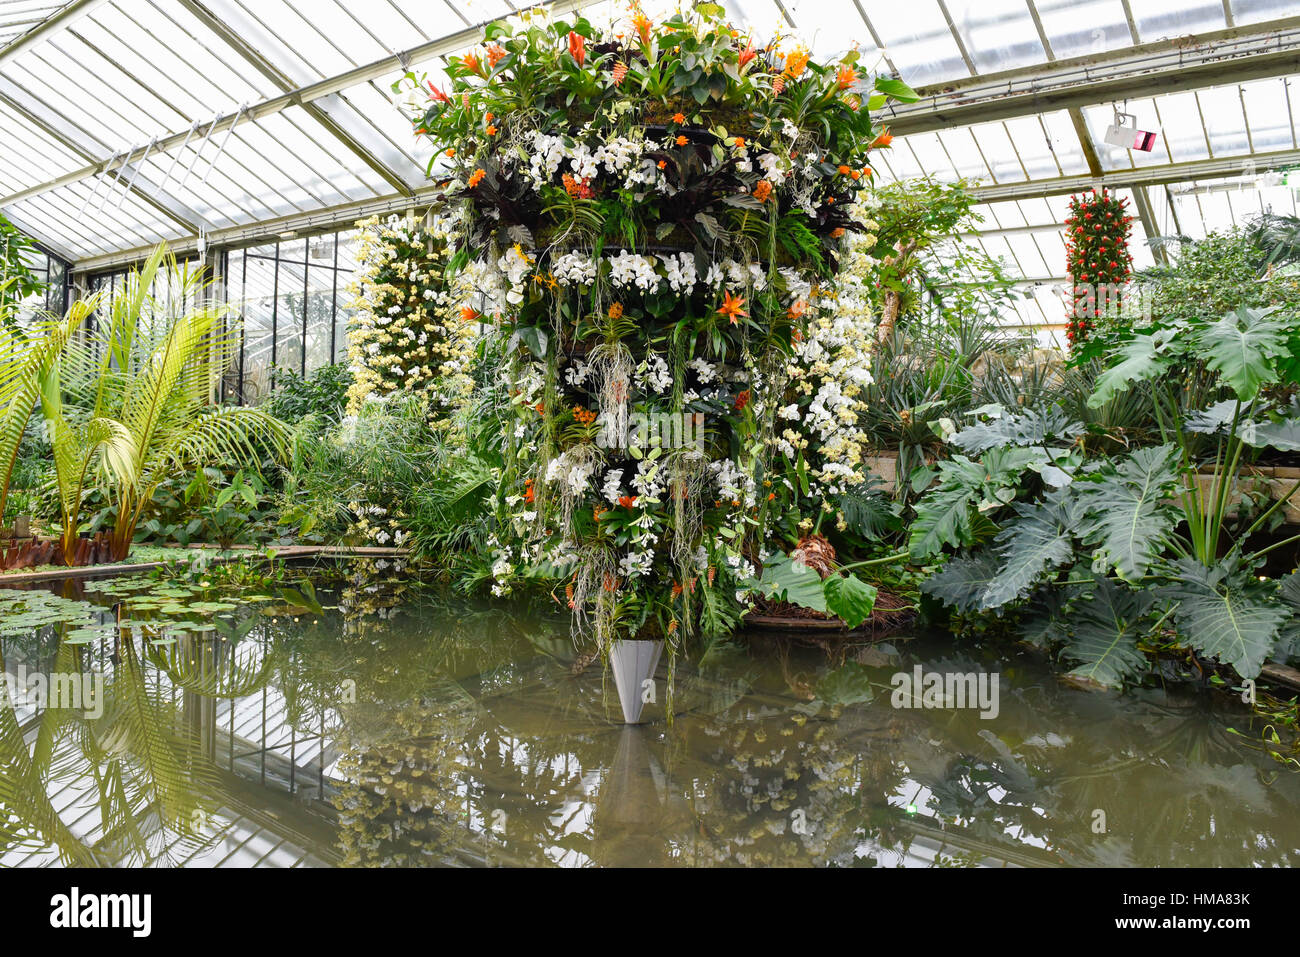 London, UK. 2nd Feb, 2017. A giant 3m x 2m floral display depicting a Samsara cone hangs over the pond in Kew Garden's annual Orchid Festival, which this year celebrates India's vibrant and colourful culture. The festival runs from 4 February to 5 March 2017. Credit: Stephen Chung/Alamy Live News Stock Photo